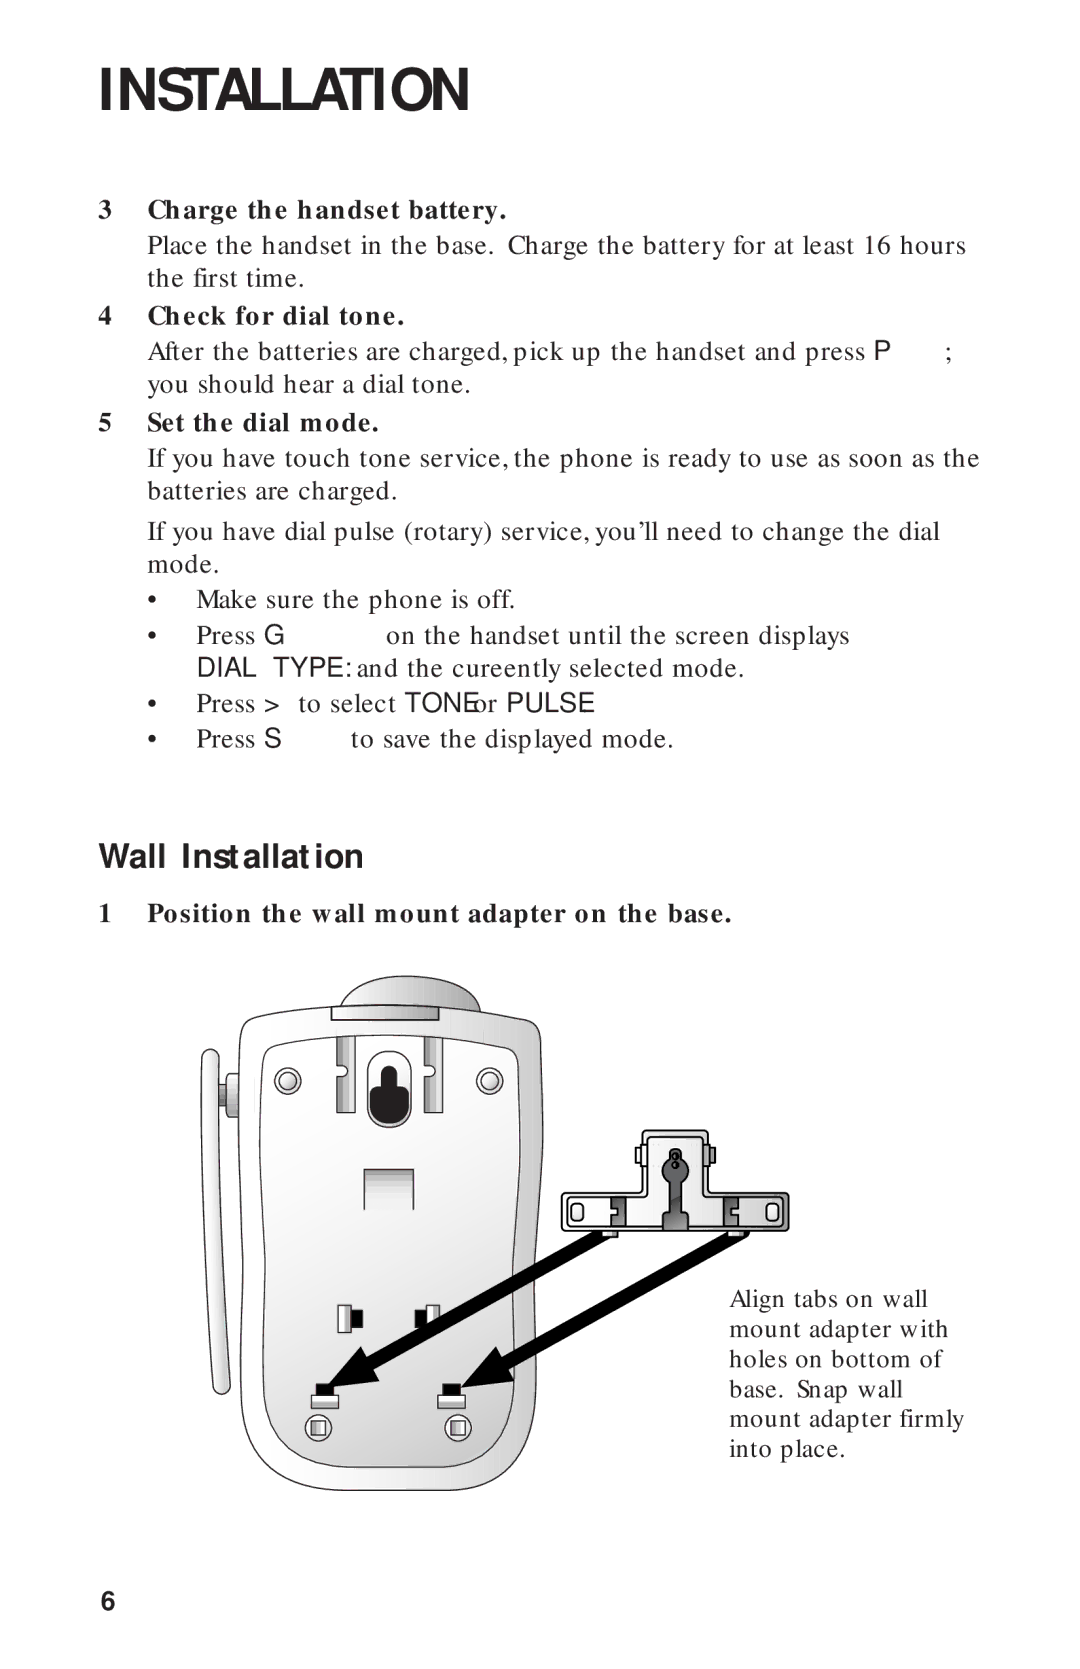 AT&T HS-8241 user manual Wall Installation, Check for dial tone 